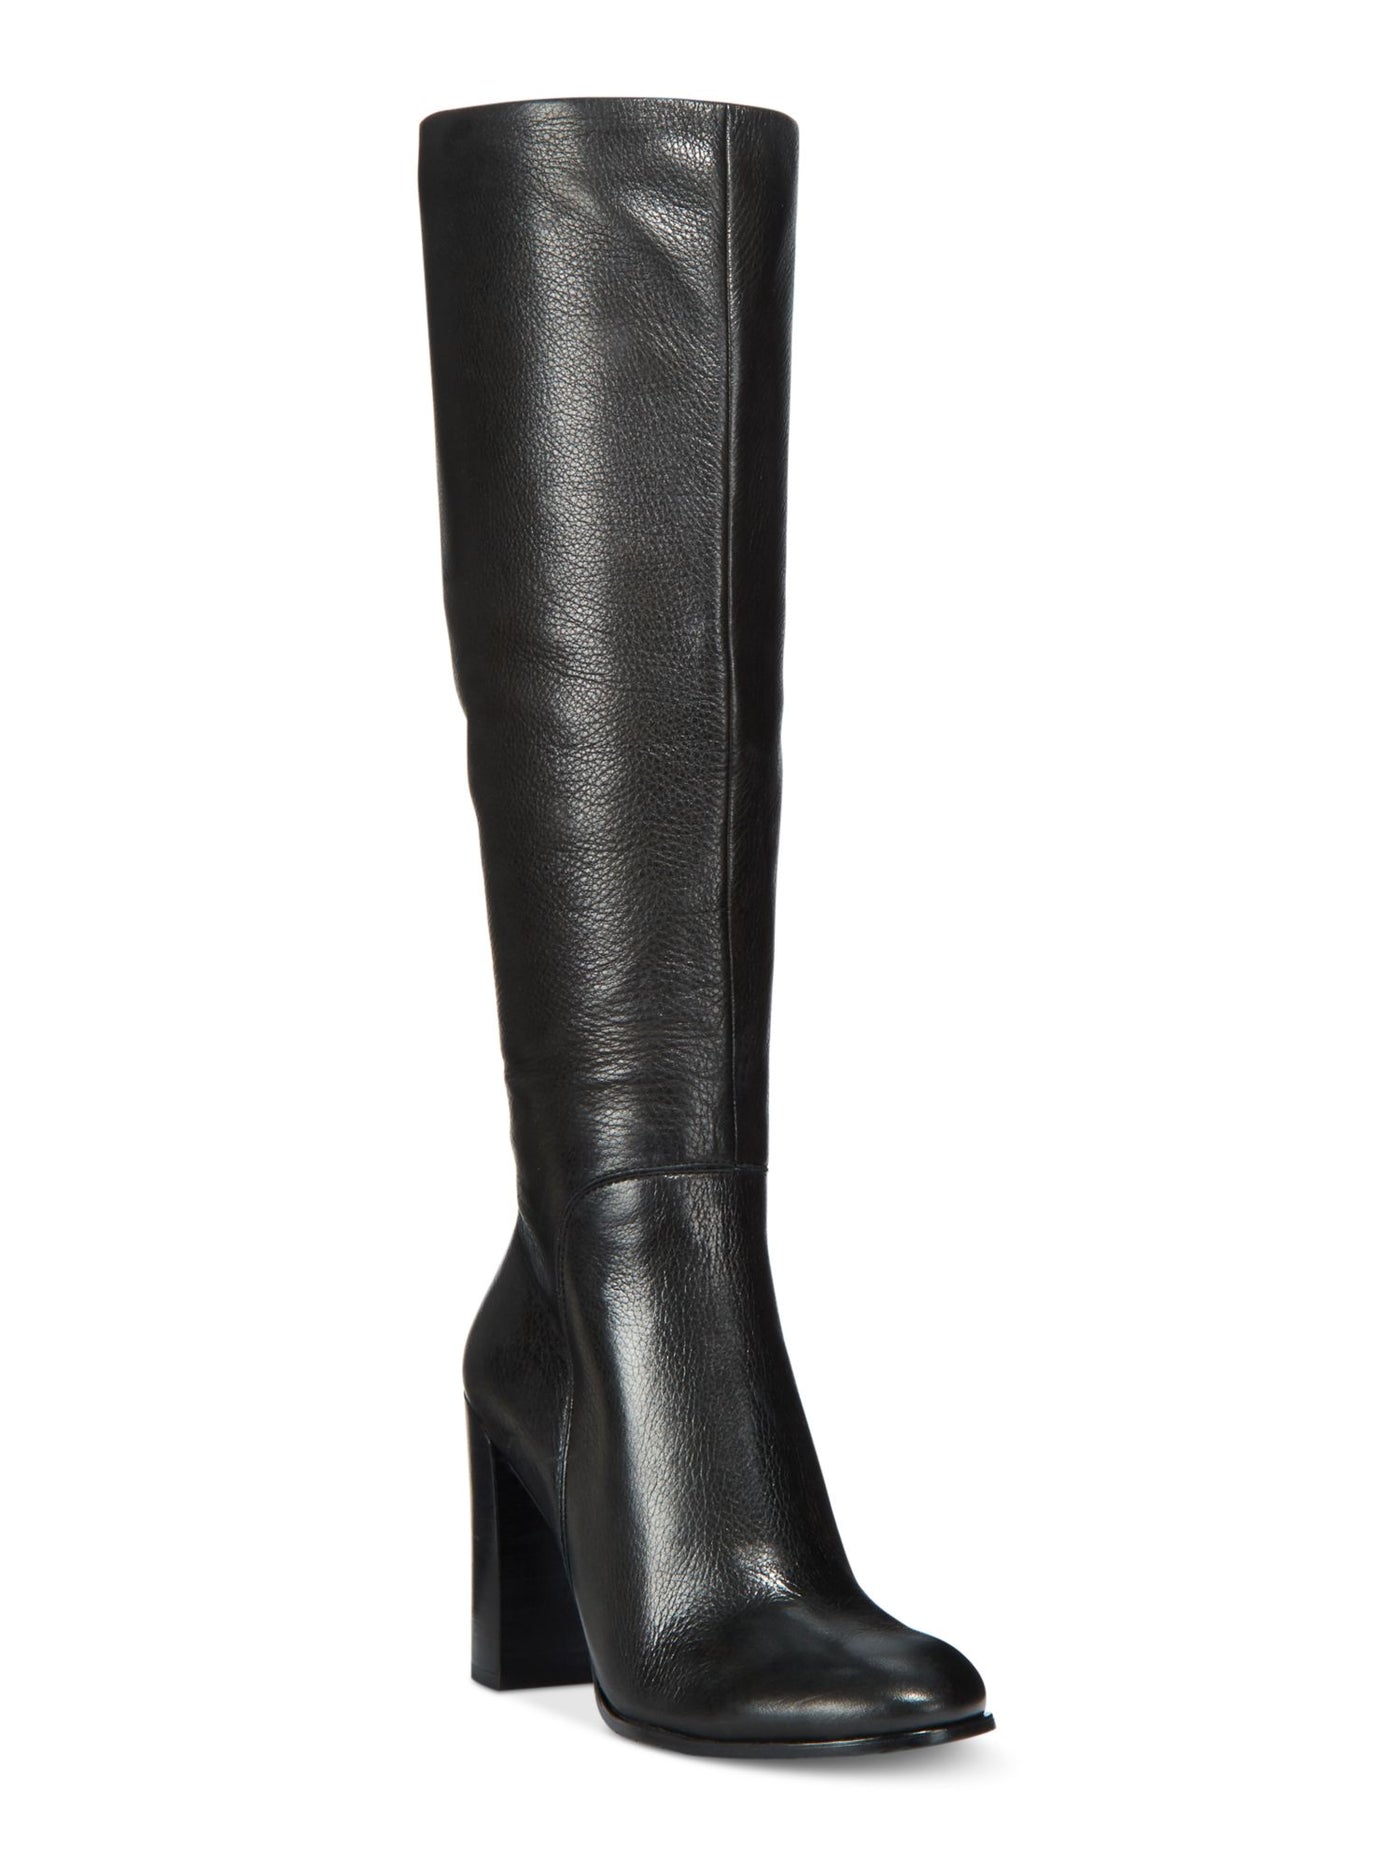 KENNETH COLE NEW YORK Womens Black Stretch Gore Padded Justin Round Toe Block Heel Zip-Up Leather Riding Boot 5.5 M